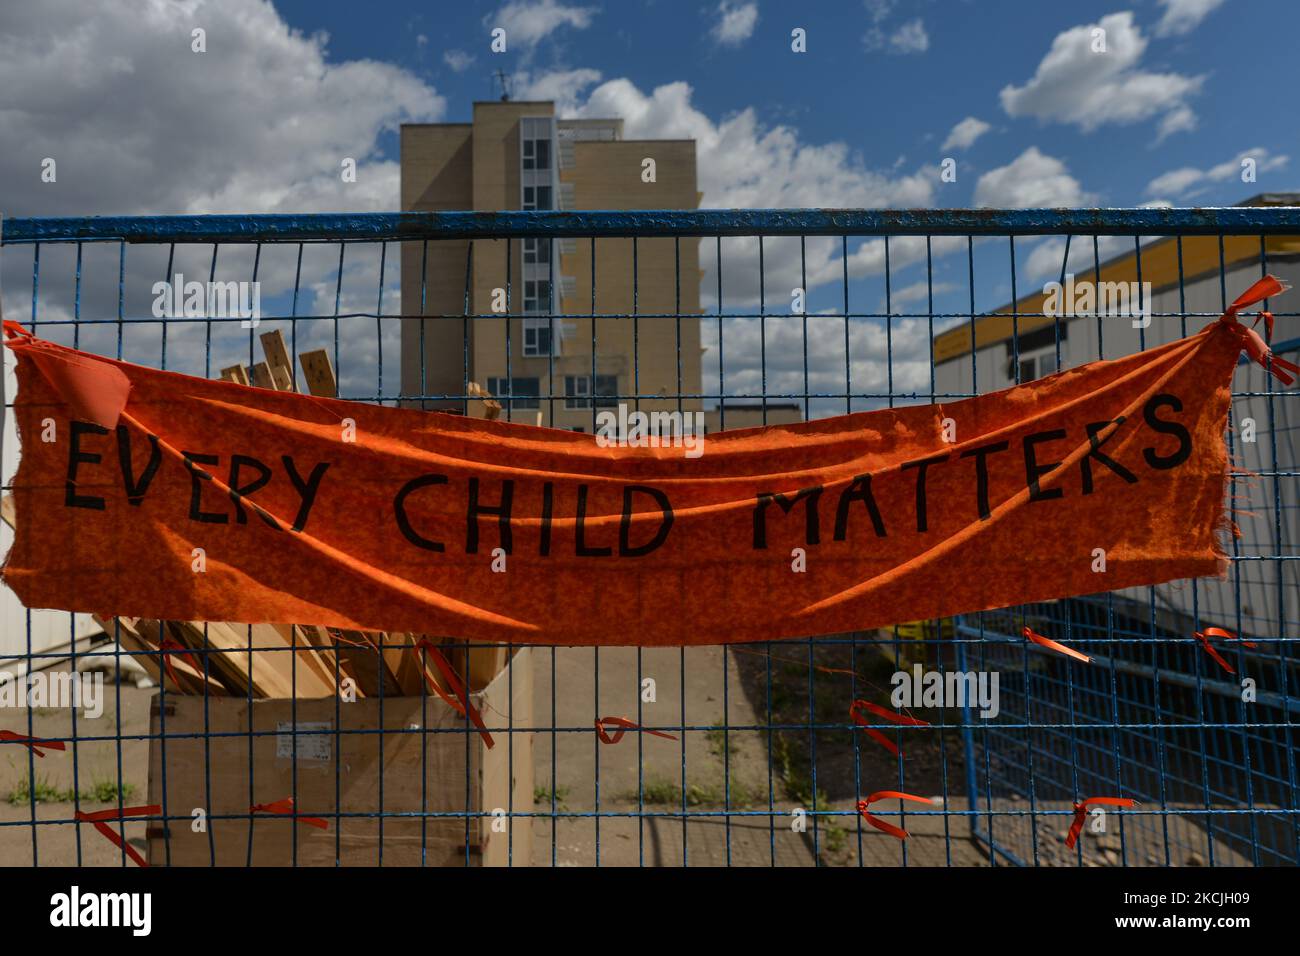 A banner that reads 'Every Child Matters' attached to the fence surrounding the grounds of the former Charles Camsell Hospital in North Edmonton. First Nation members have been calling for construction to stop at the former Camsell Hospital where many believe patients may have been buried. Charles Camsell Hospital served as a hospital (1945-1996) for treating First Nations people with tuberculosis, but also a site where patients were subjected to research. On Wednesday, 11 August 2021, in Edmonton, Alberta, Canada. (Photo by Artur Widak/NurPhoto) Stock Photo